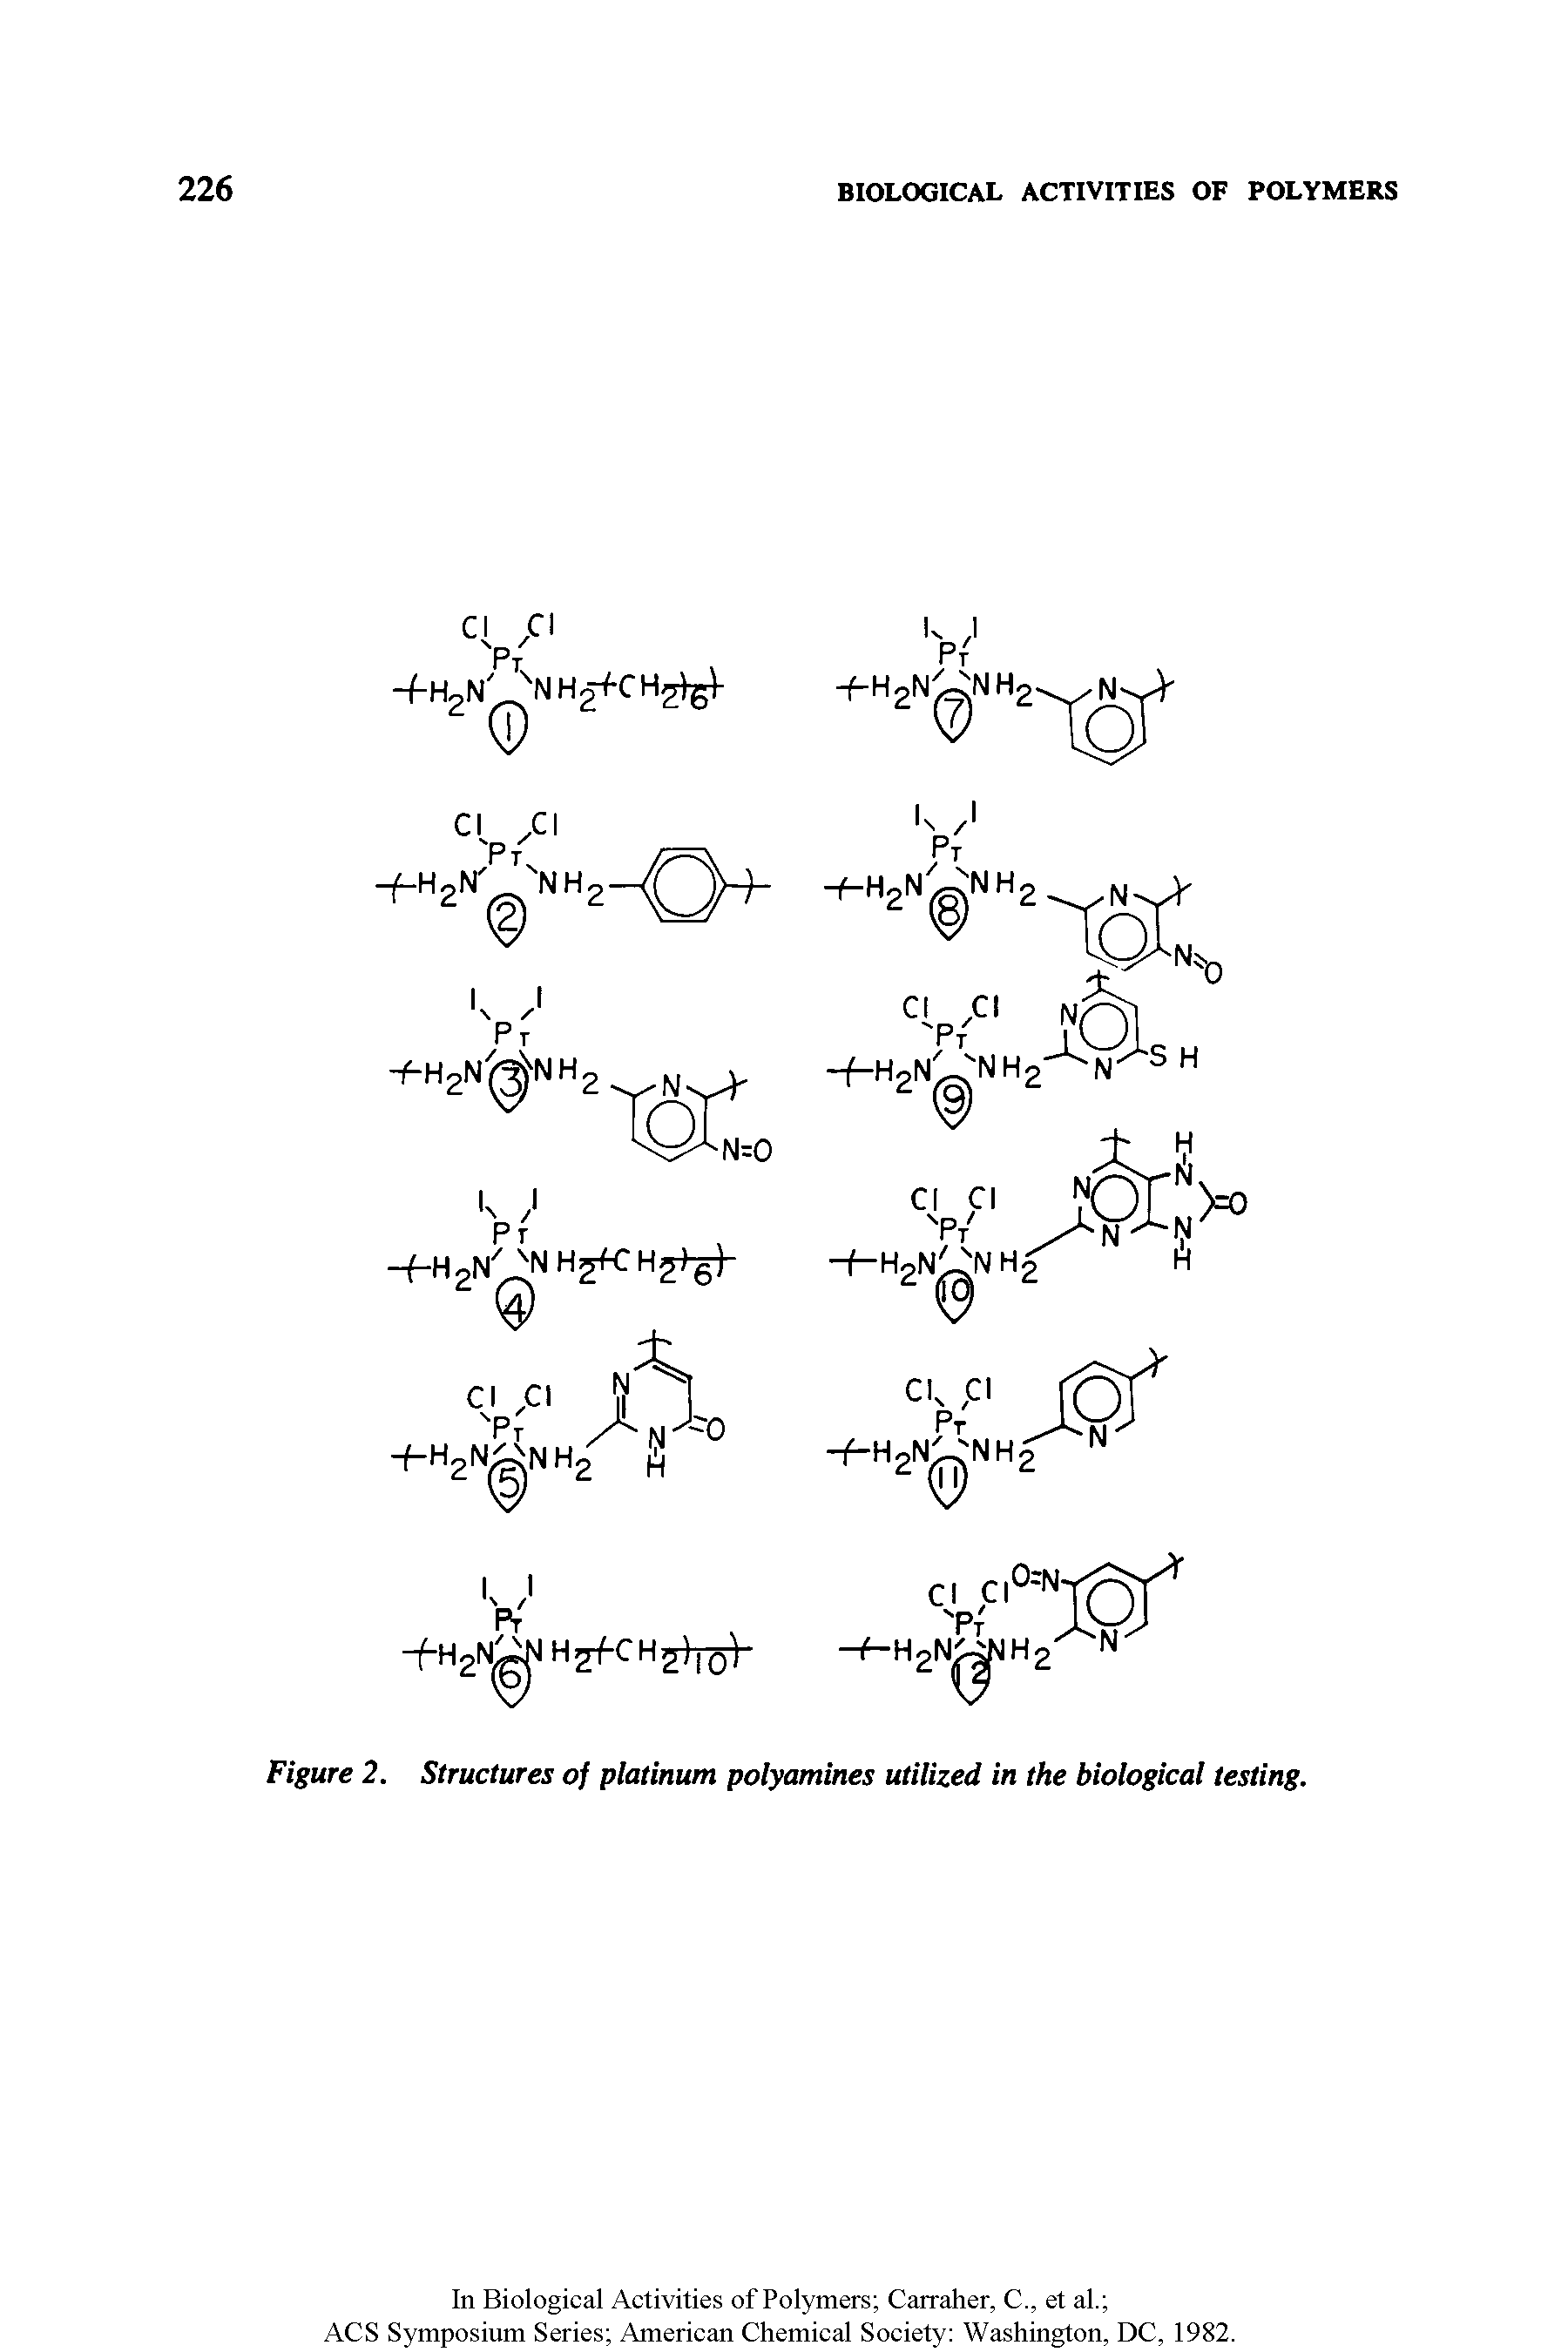 Figure 2. Structures of platinum polyamines utilized in the biological testing.